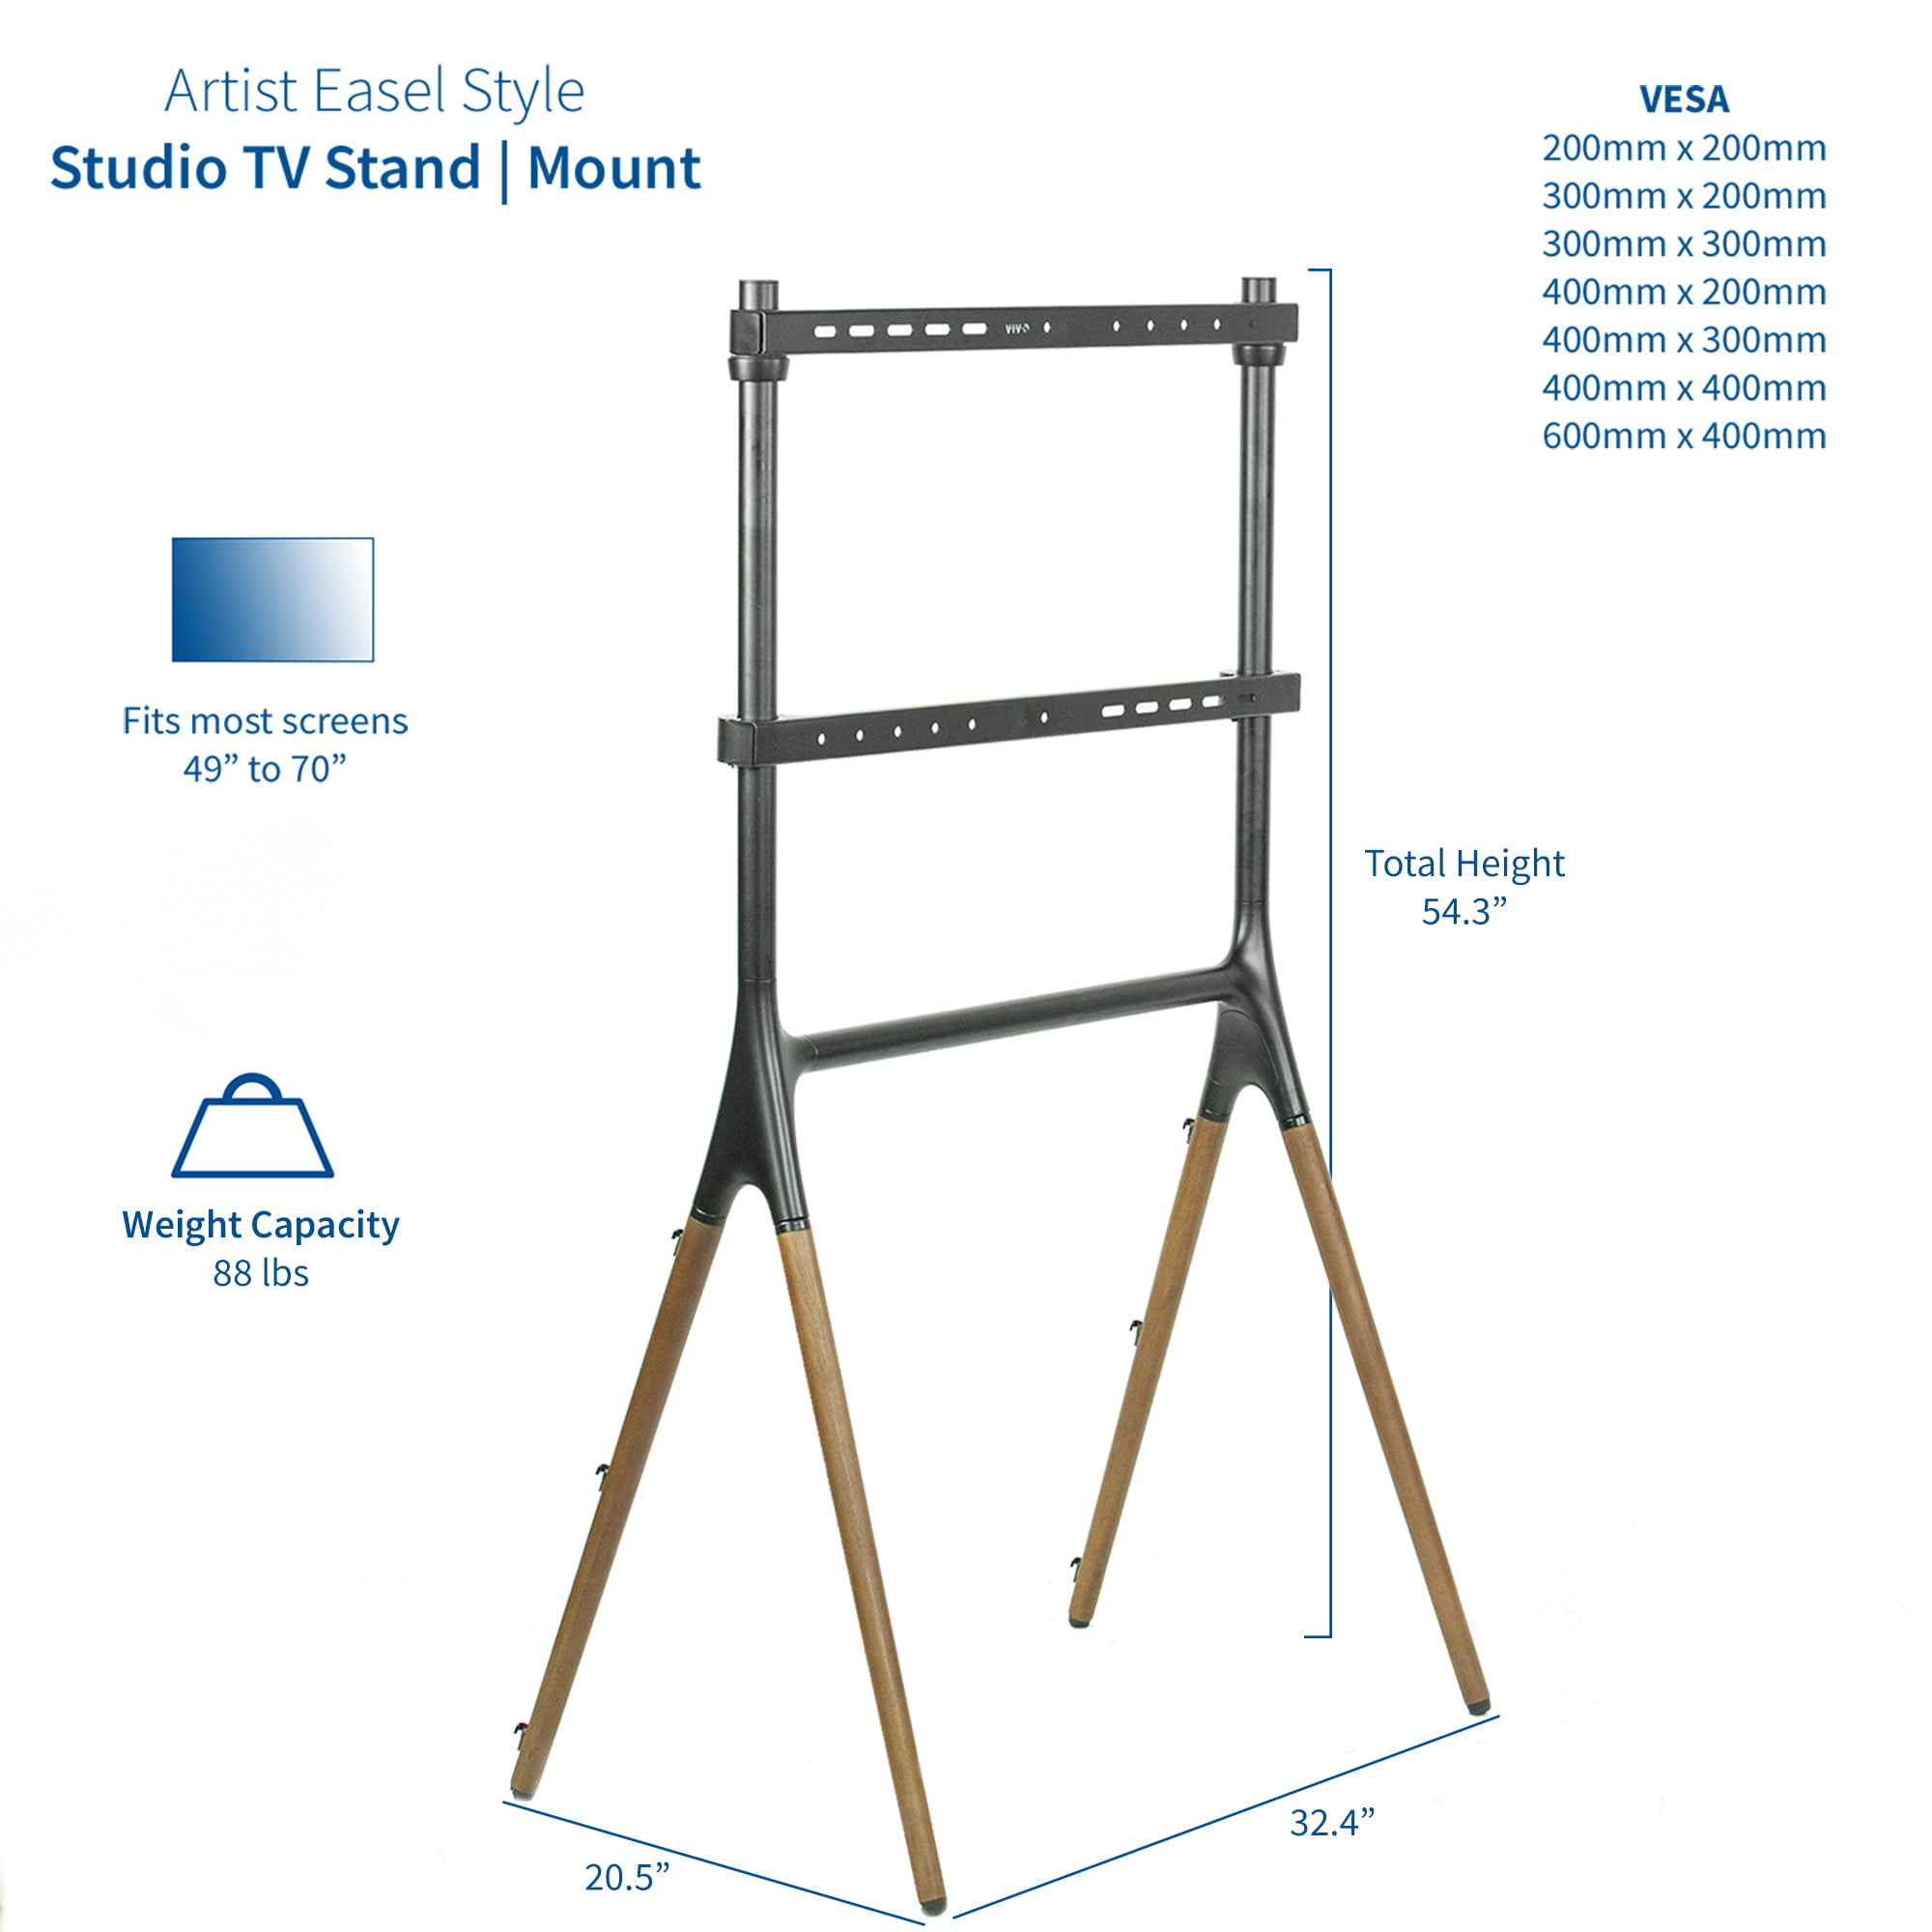 Glorider Artistic Tripod Easel TV Floor Stand for 45-65 Inch Screens Meeting Room Suitable for Living Room Tripod Base and Non-Slip Pads Portable TV Mount with Height Adjustment 25.6 inch Office 